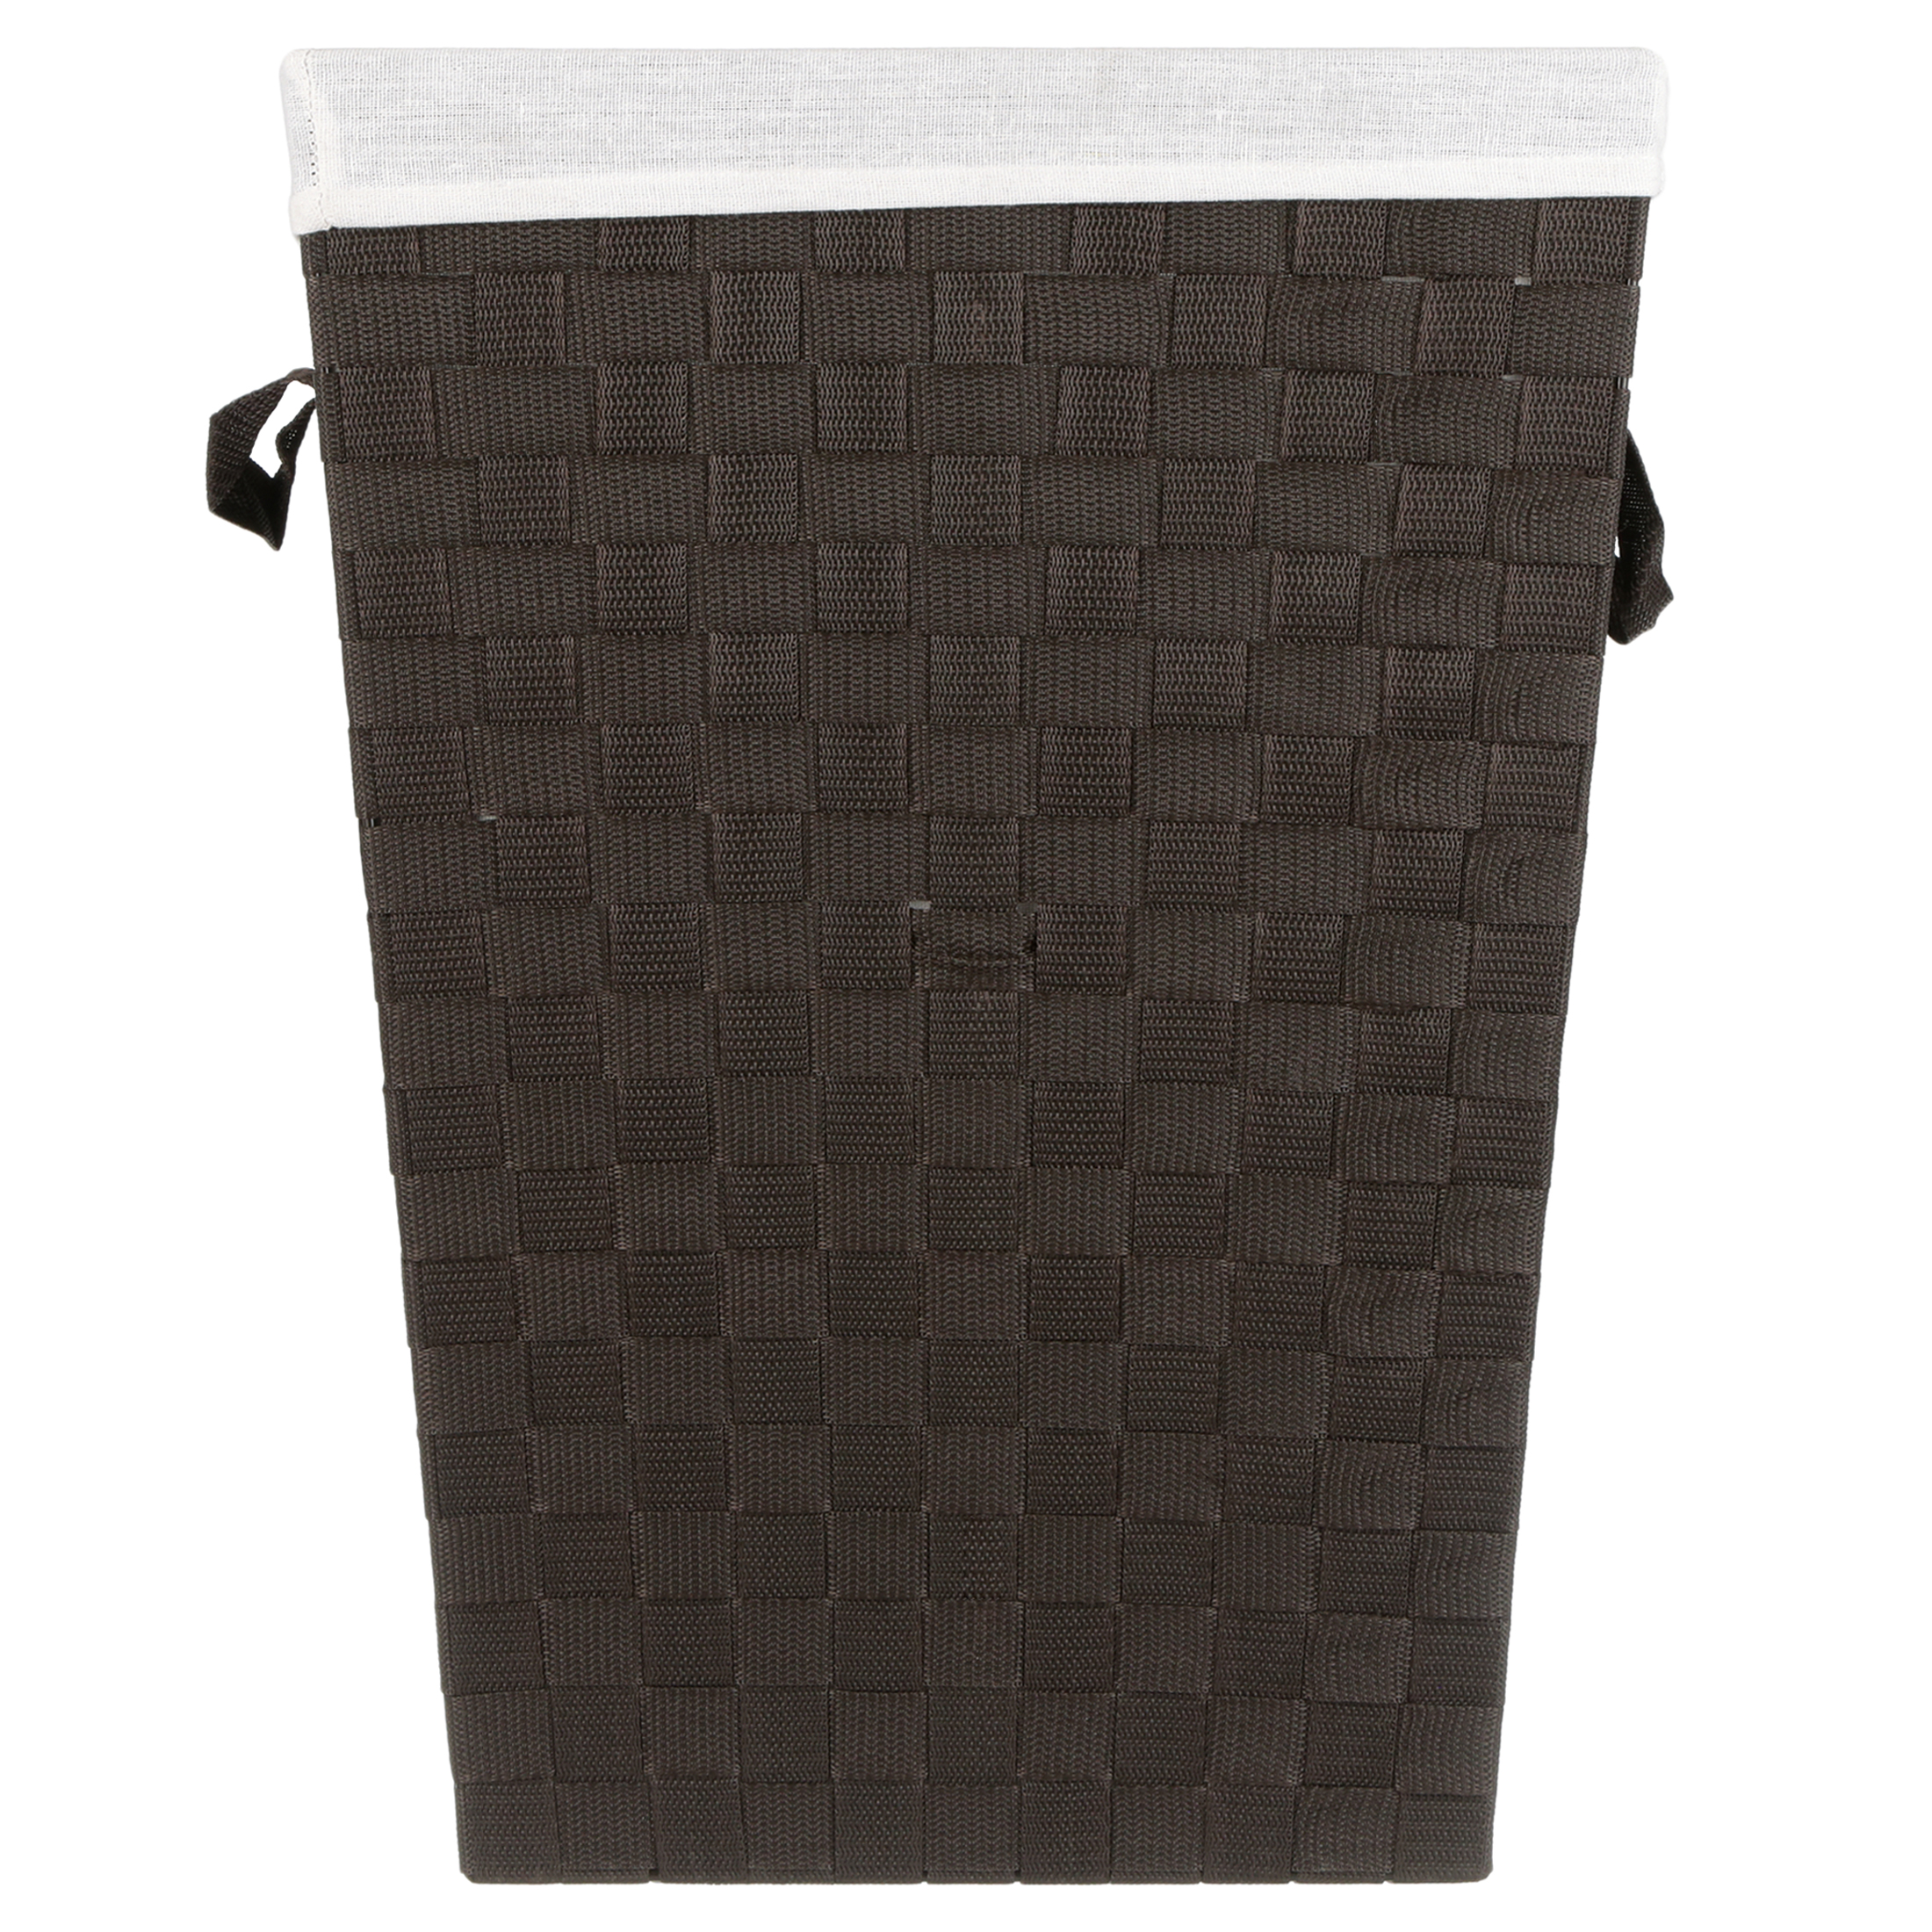 Whitmor Woven Strap Laundry Hamper with Fabric Liner, Espresso - image 3 of 8